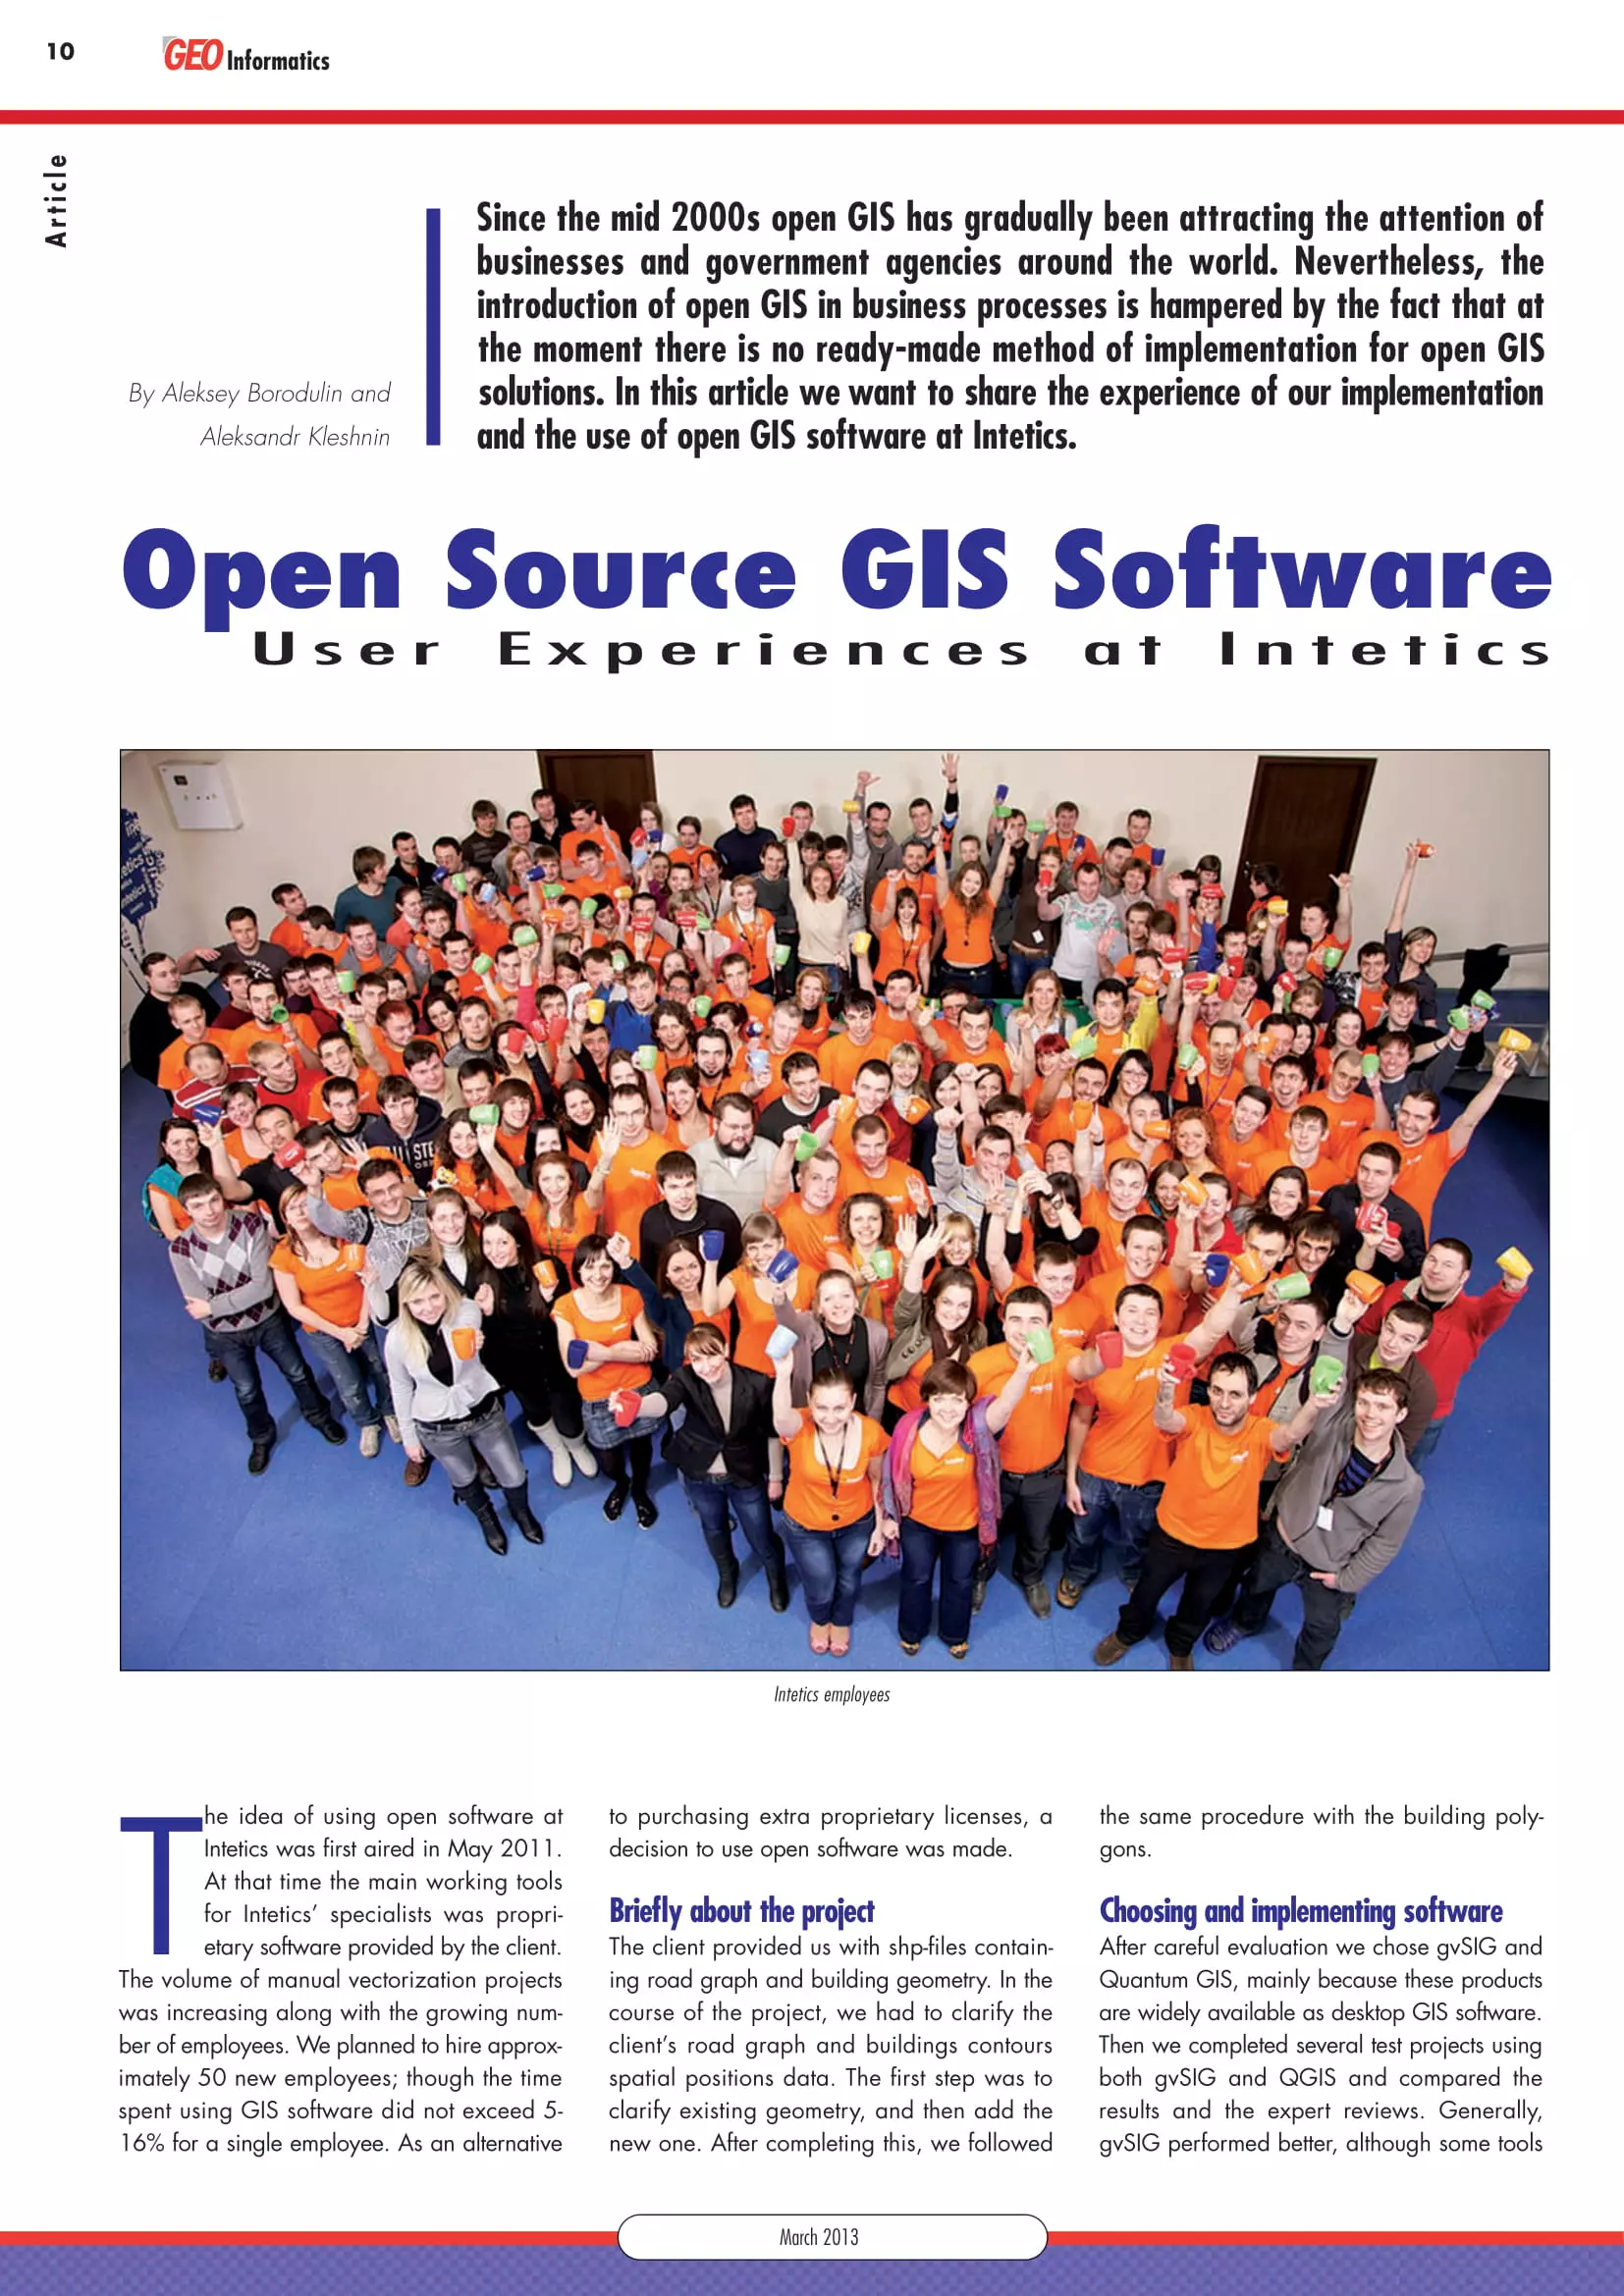 Intetics-experience-with-open-source-GIS-software-1